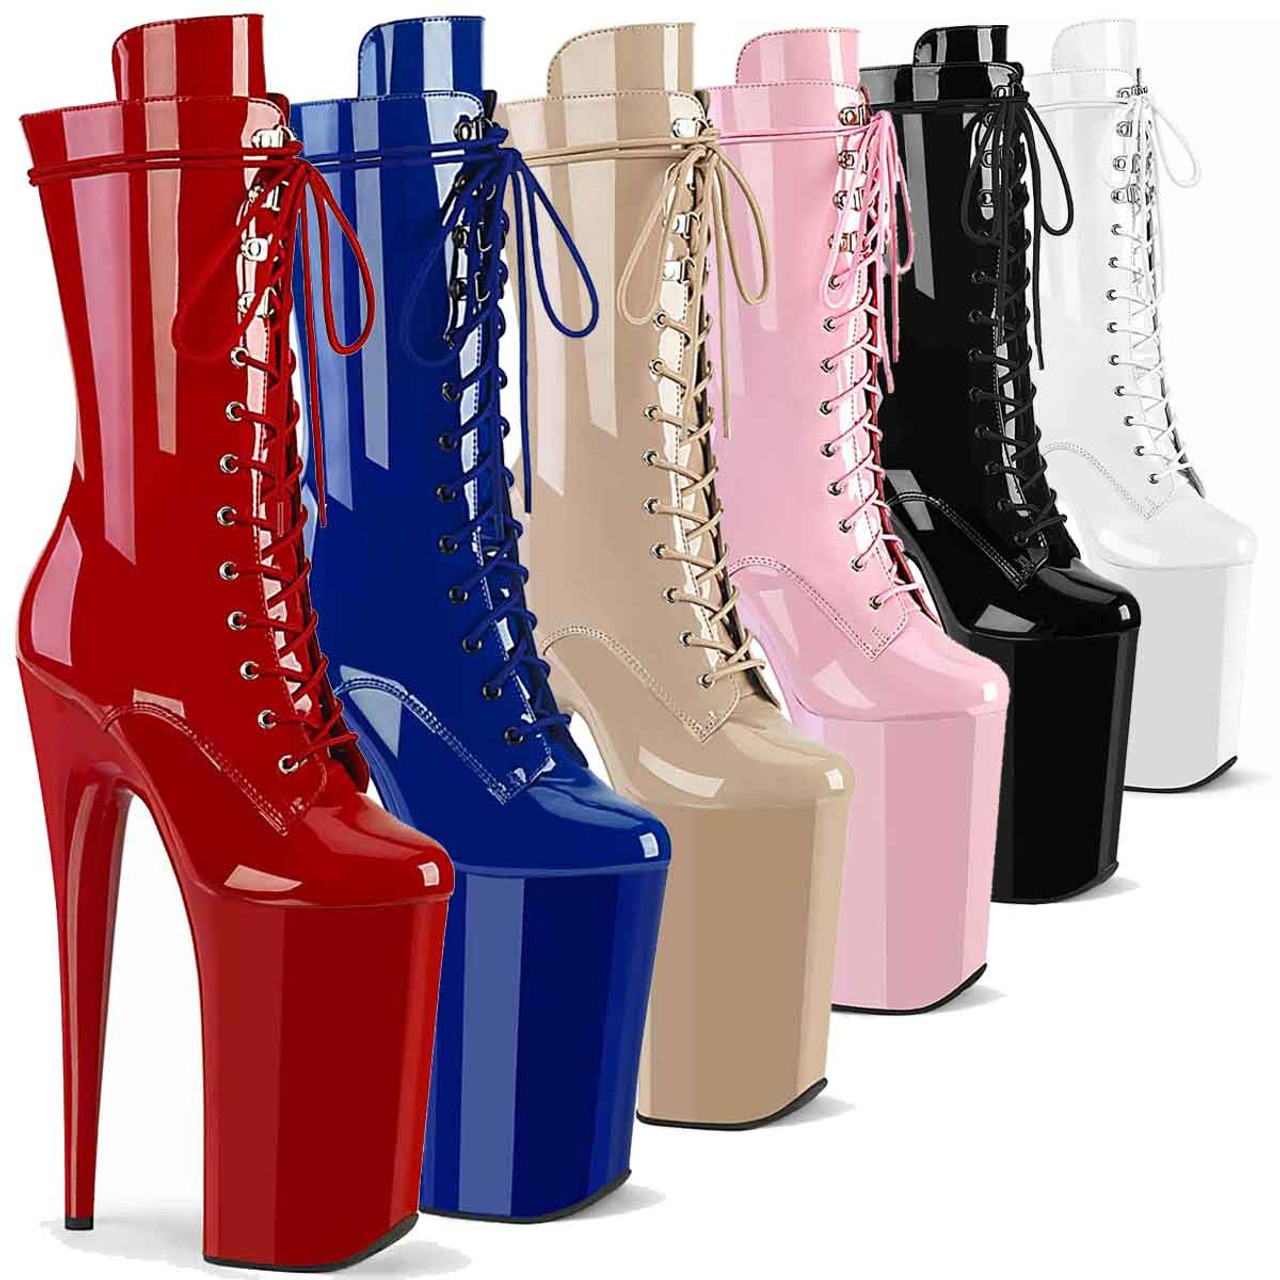 BEYOND-1050, 10 Inch Mid-Calf Boots with Extreme 10 Inch Heel By Pleaser